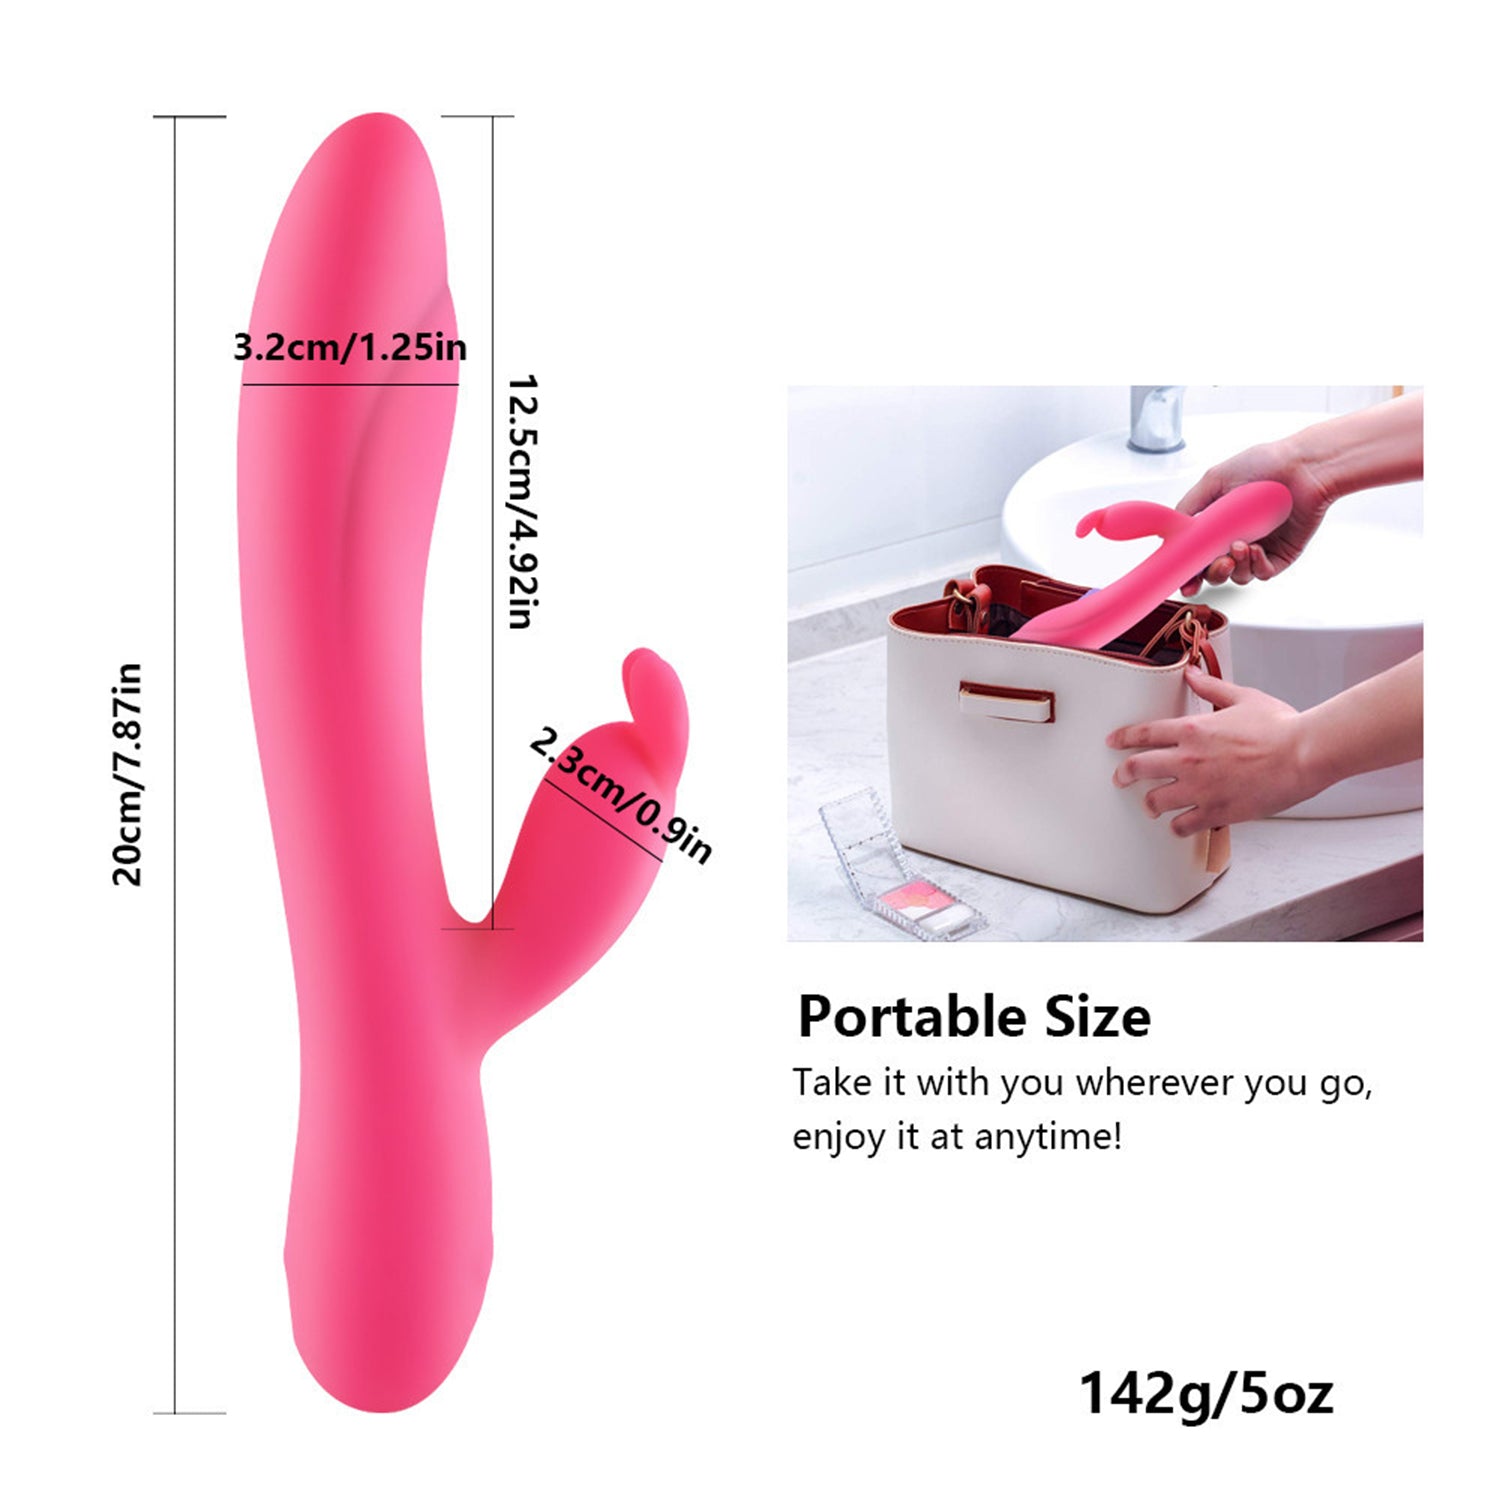 G-Spot Rabbit Vibrator Clitoris Stimulator - Silicone Vaginal Anal Dildo Massager for Women Maturbation, Powerful Waterproof Rechargeable Adult Sex Toys for Couples Sex Things